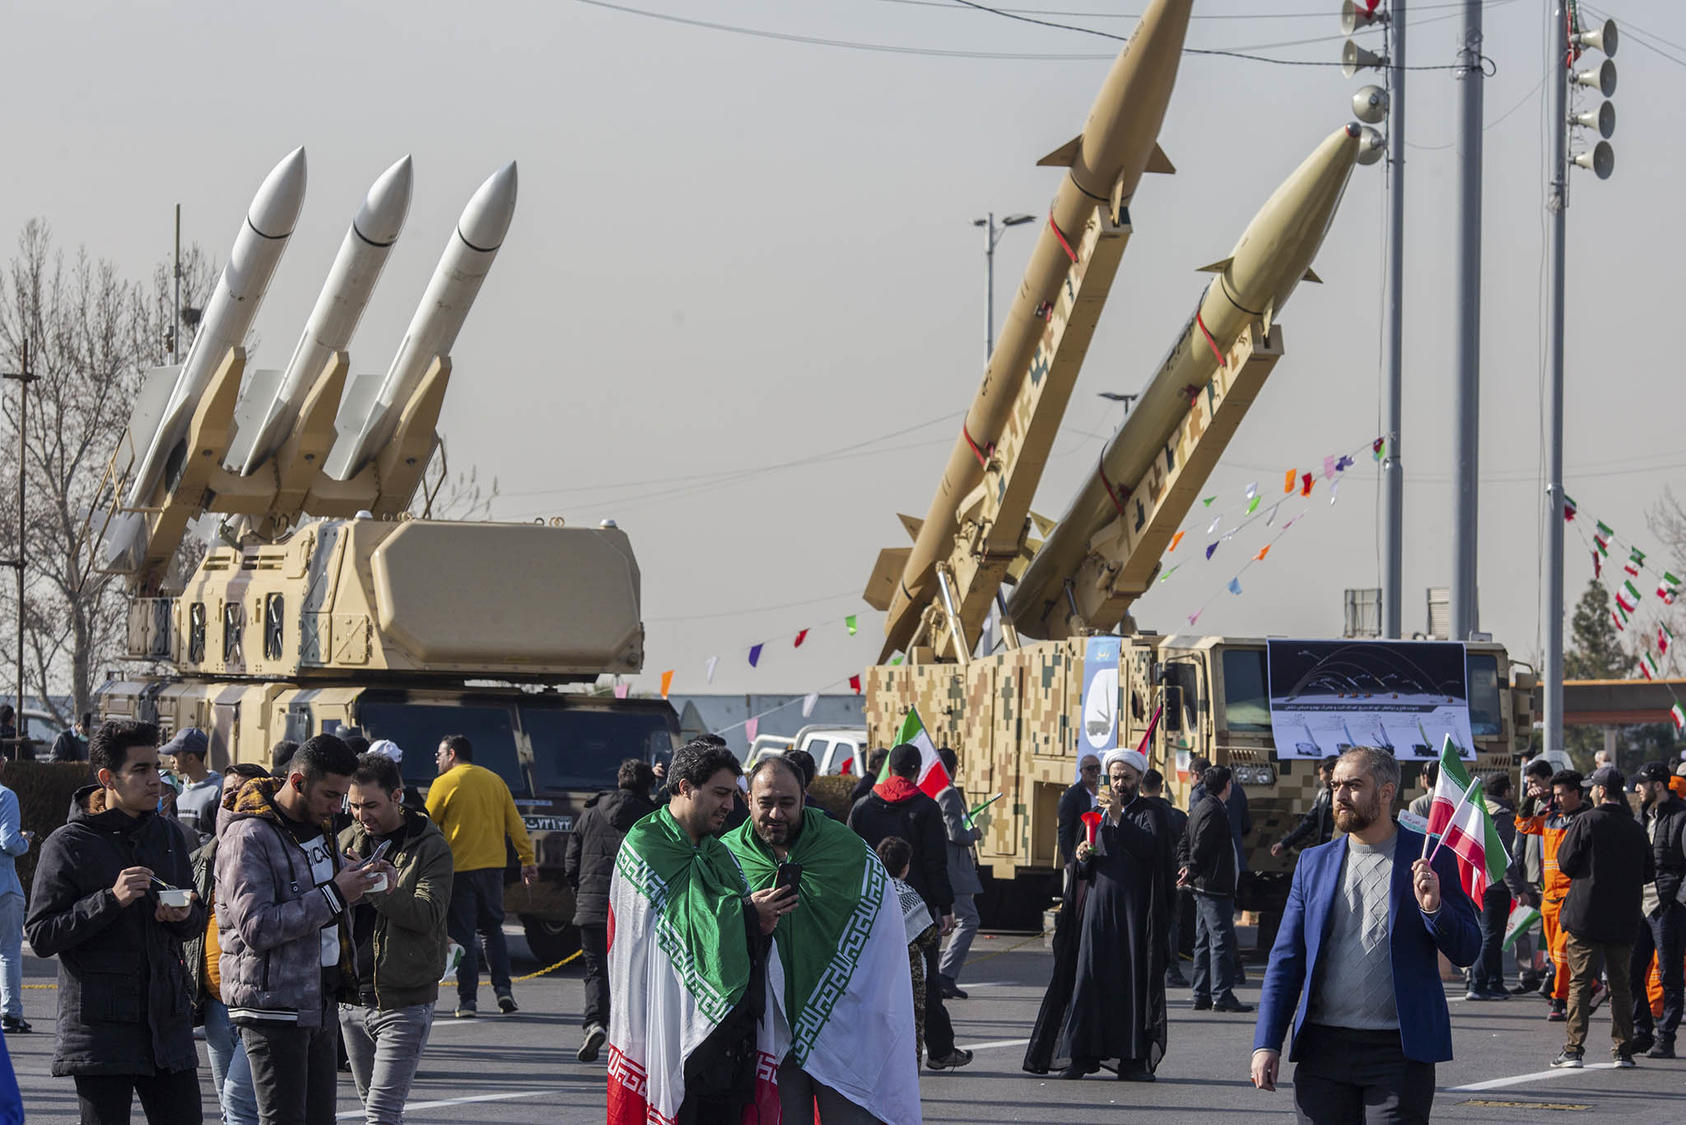 Citizens walk near missile carriers and other weapons displayed during an event marking the 45th anniversary of Iran’s Islamic Revolution in Tehran, Iran, on Sunday, Feb. 11, 2024. (Arash Khamooshi/The New York Times)